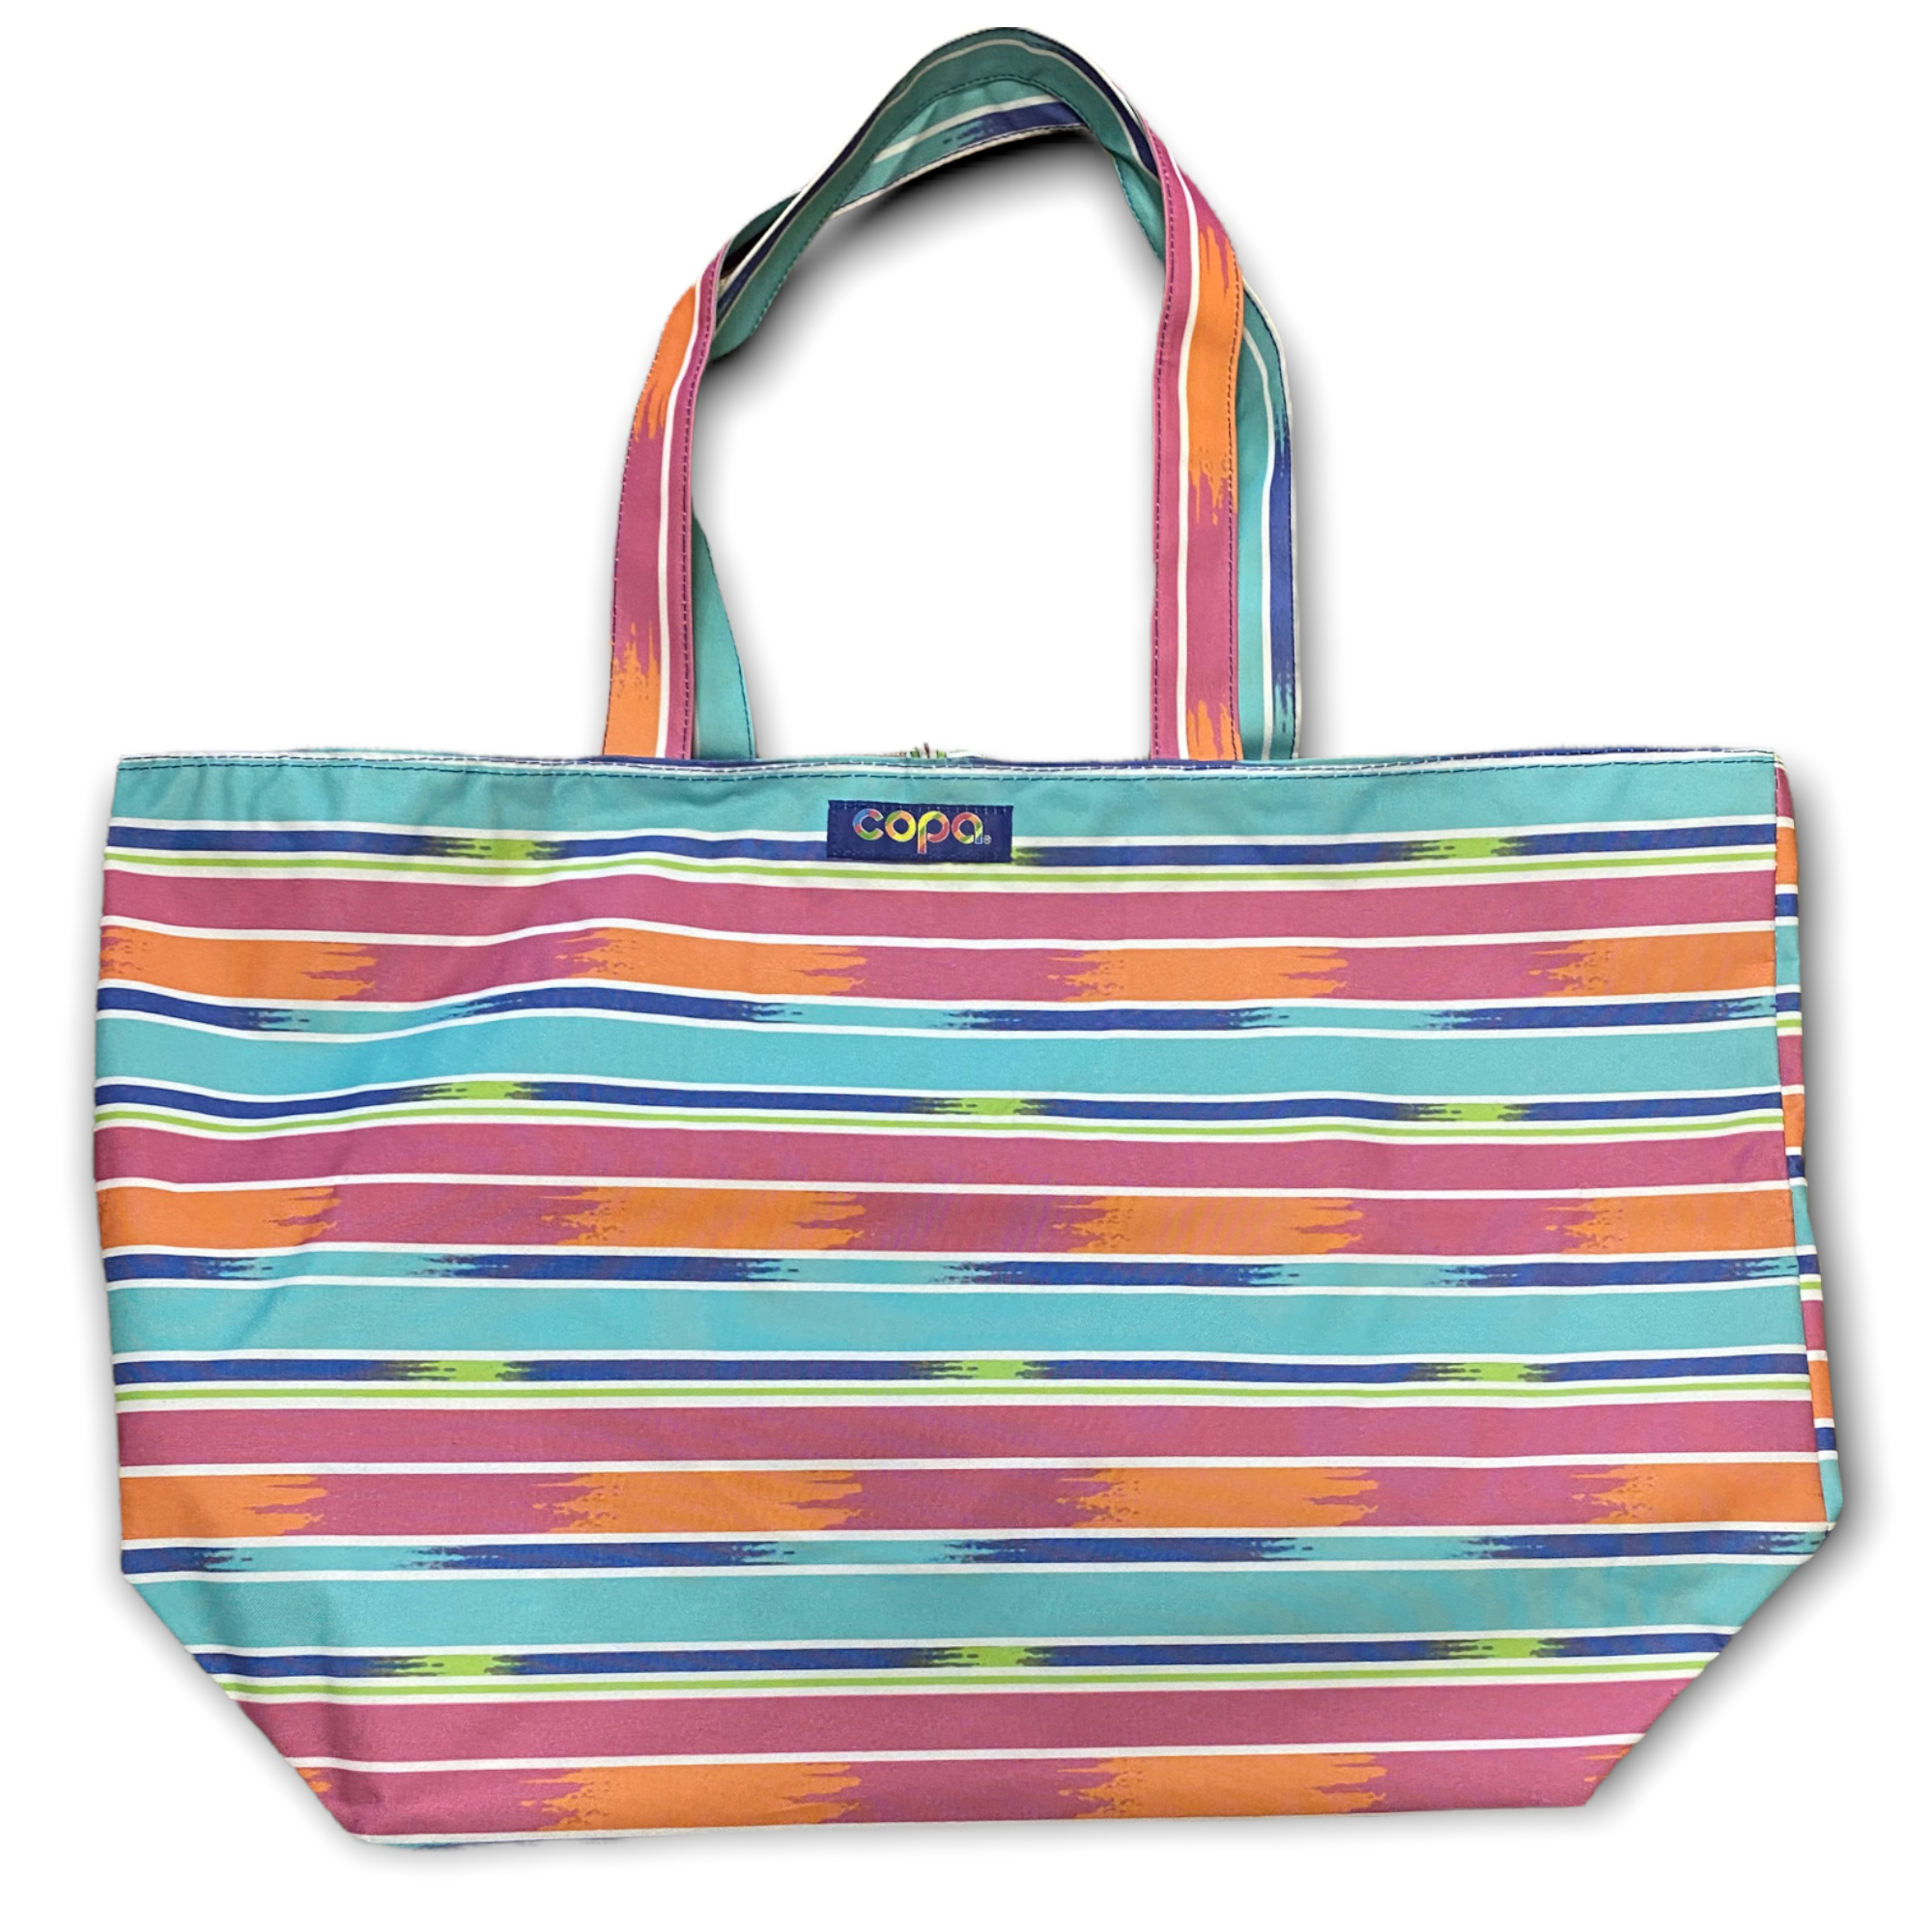 BASTIA Tote Bagundefined by 2G2P